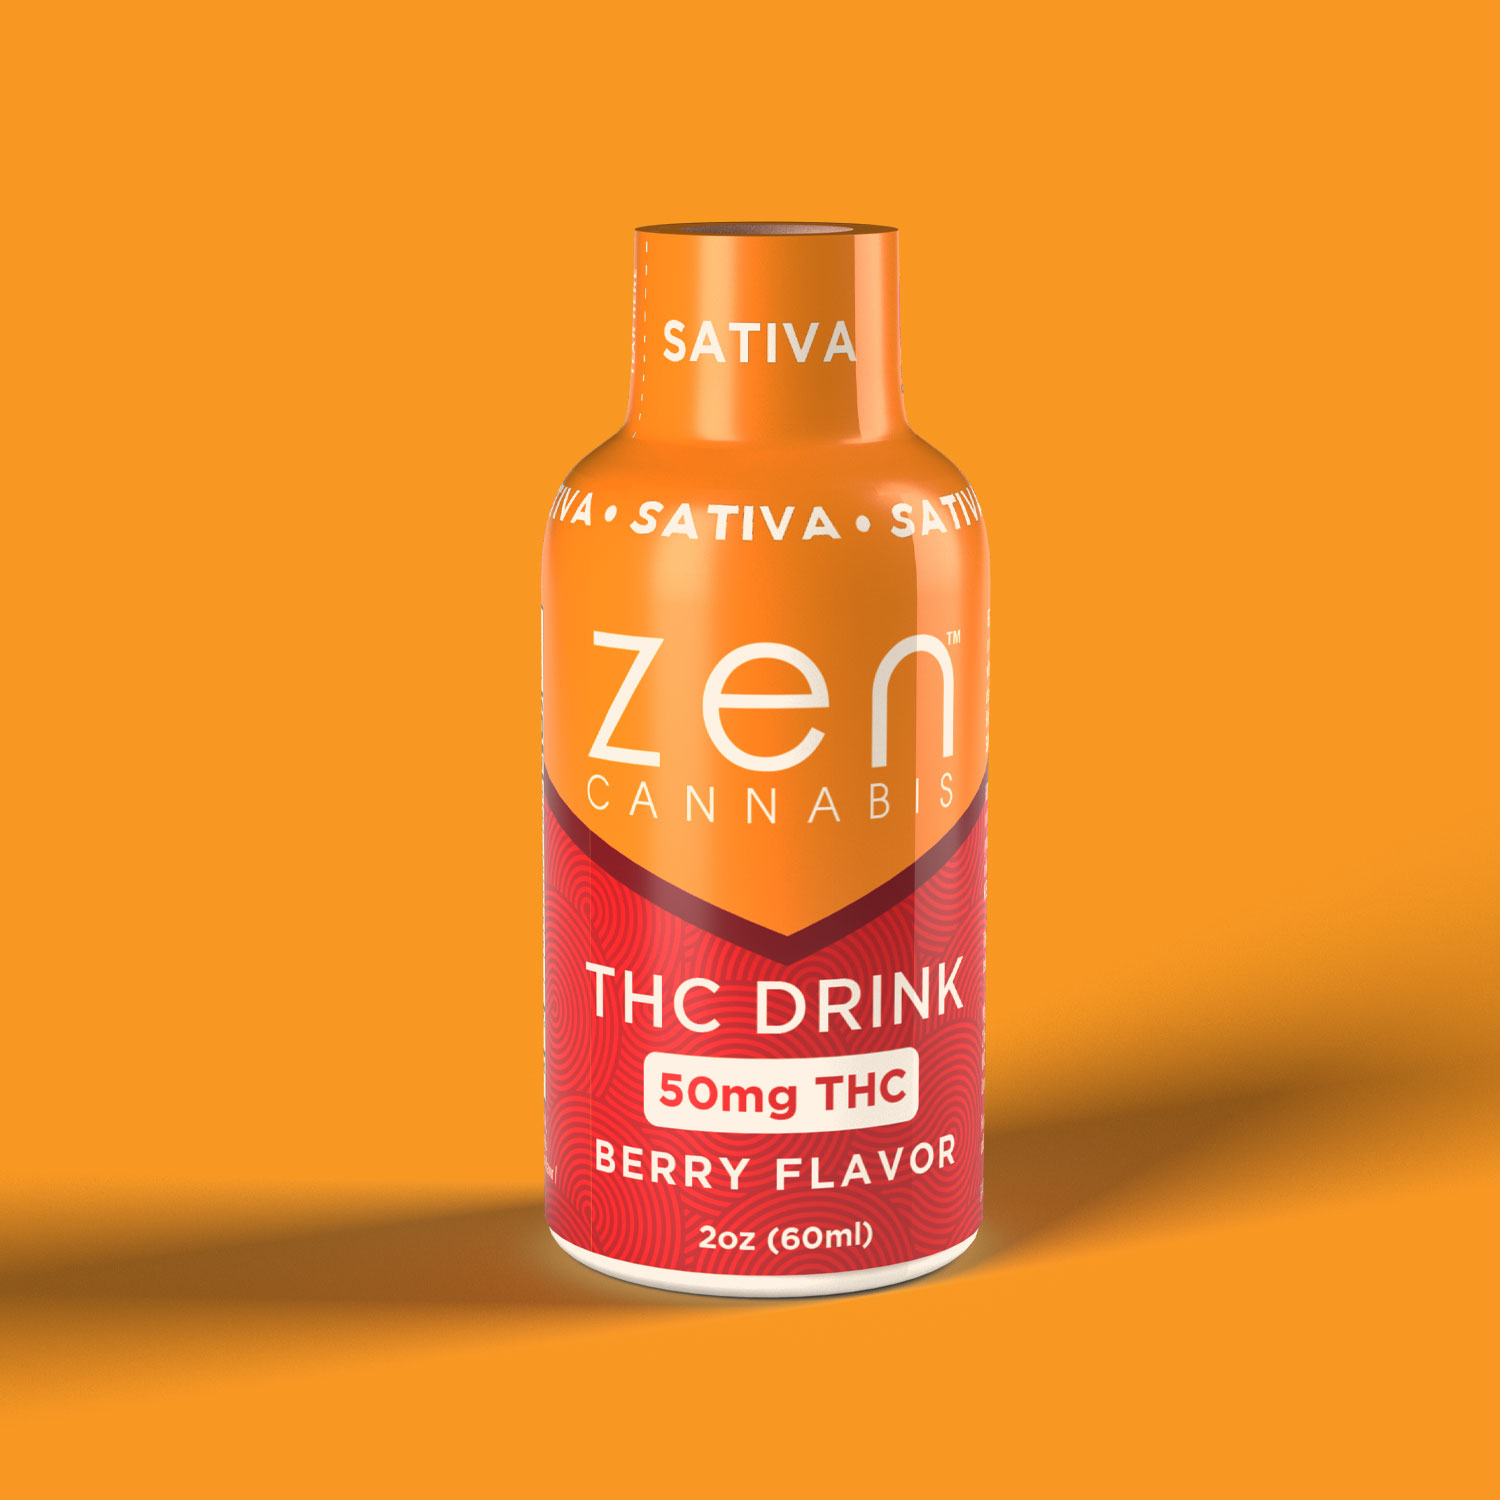 SATIVA | 50mg THC
A two-ounce burst of delectably sweet berry flavor to make your aches and pains melt away without the dragging you down. This sativa drink will invigorate your taste buds and keep you relaxed and pain-free without putting you to sleep.
50mg THC per bottle | 2oz (60ml)